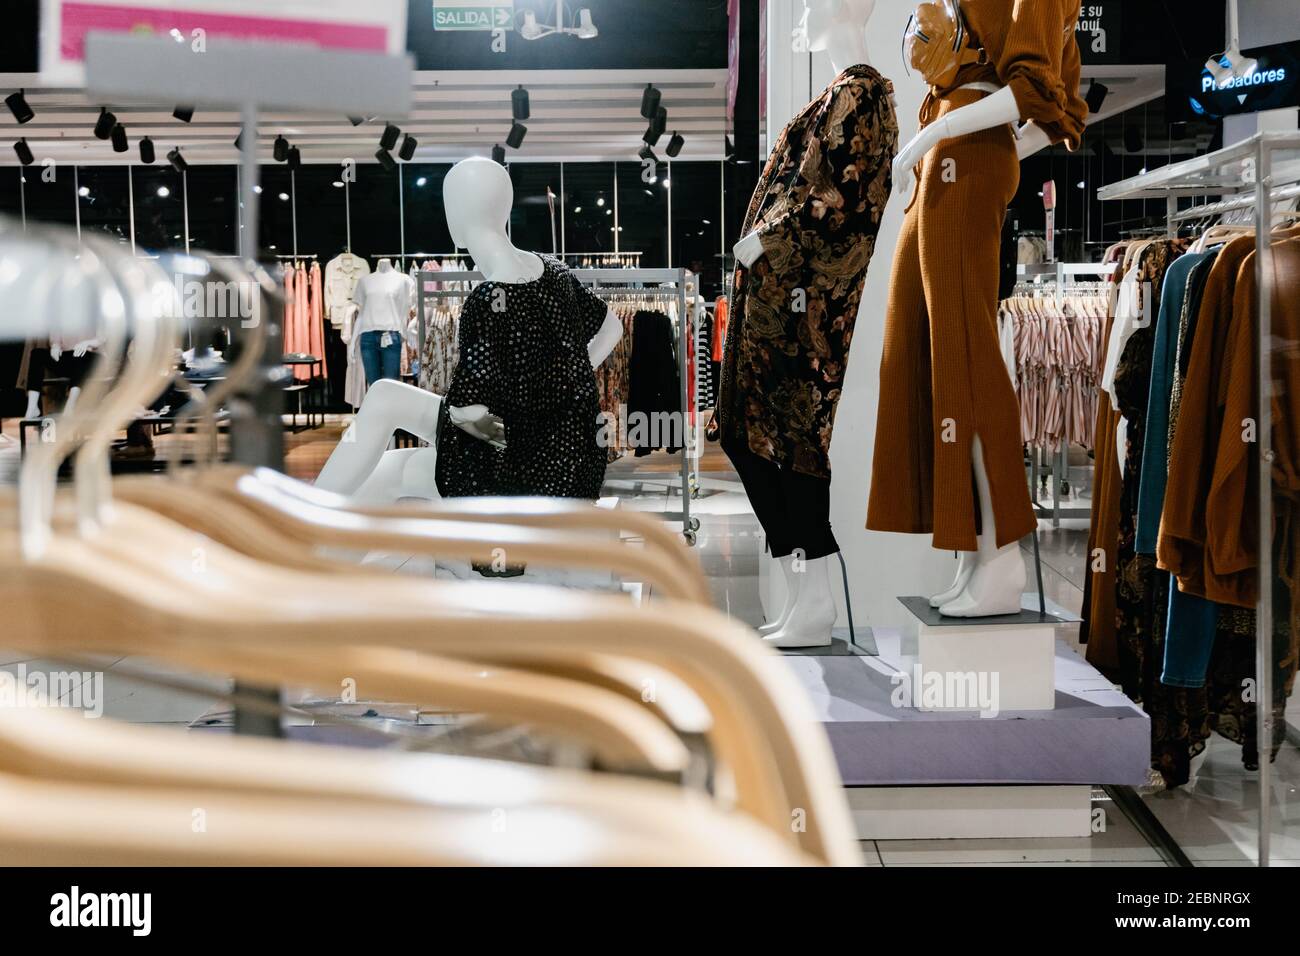 clothing store with 3 mannequins in the background, women's section. Falabella Argentina Stock Photo